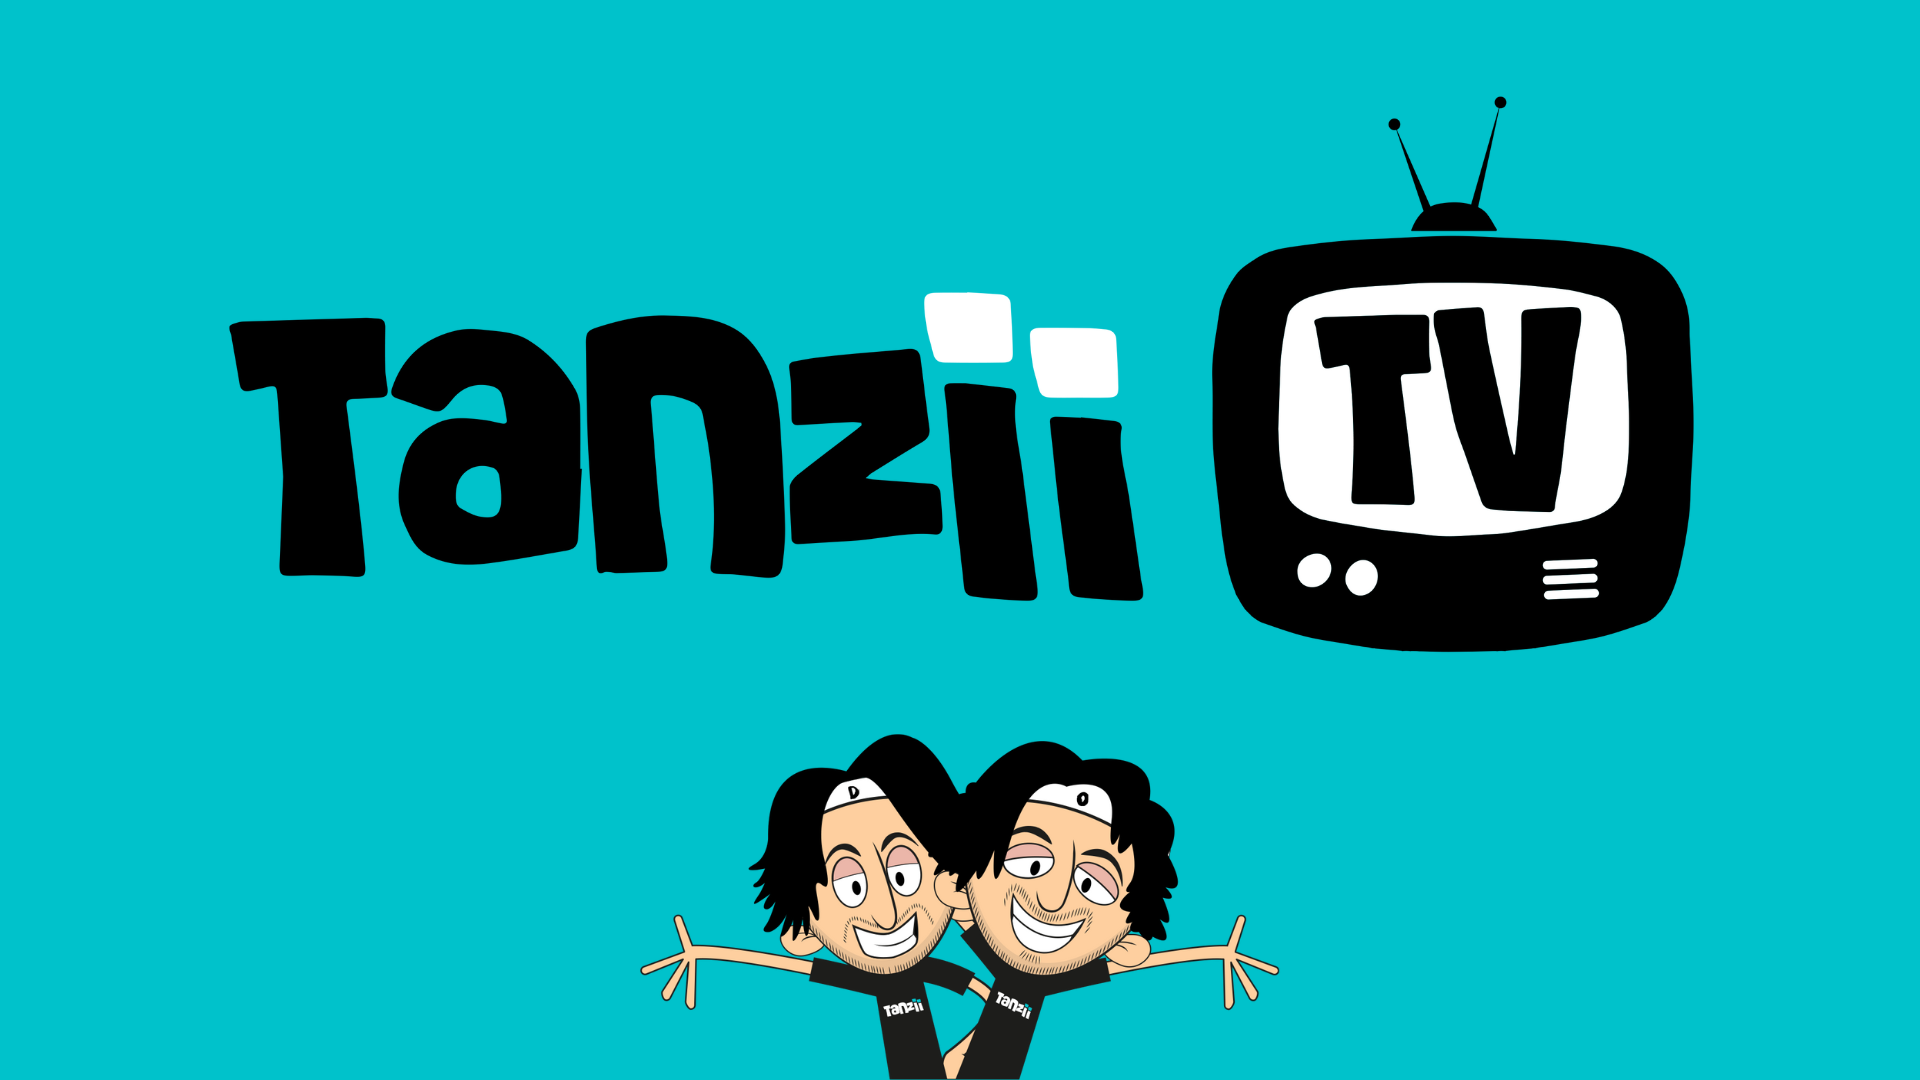 Blue background with Tanzii TV in black text and two cartoons of men at the bottom